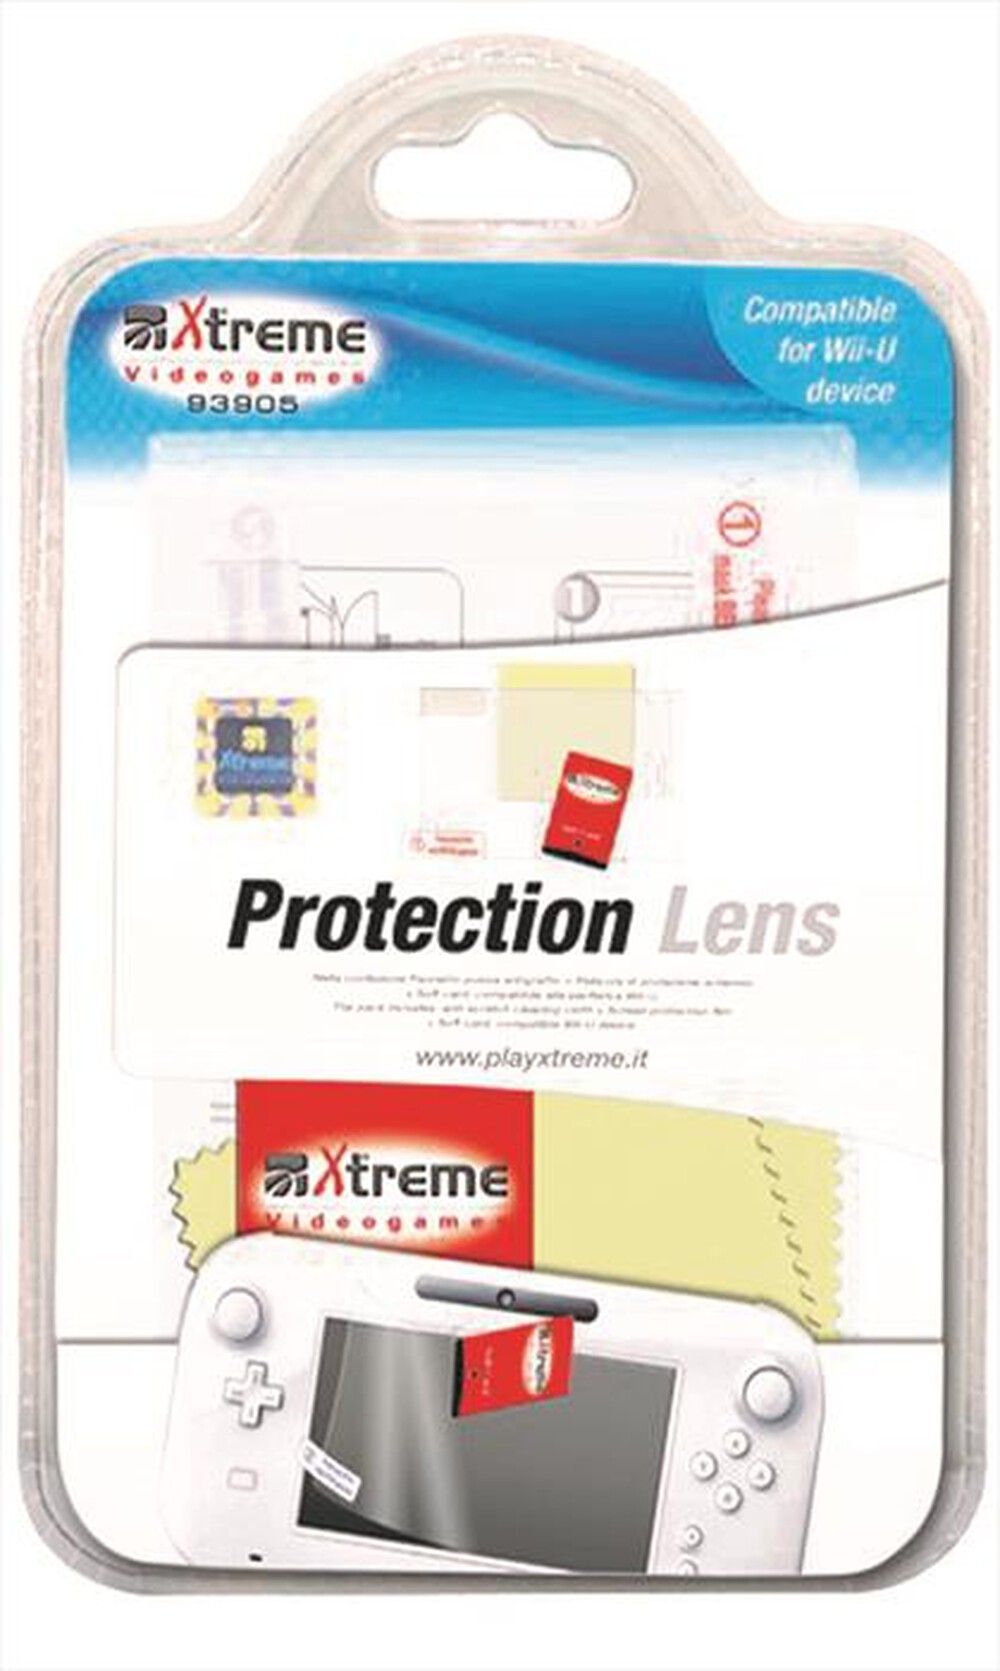 "XTREME - 93905 - Wii-U Protection Lens"